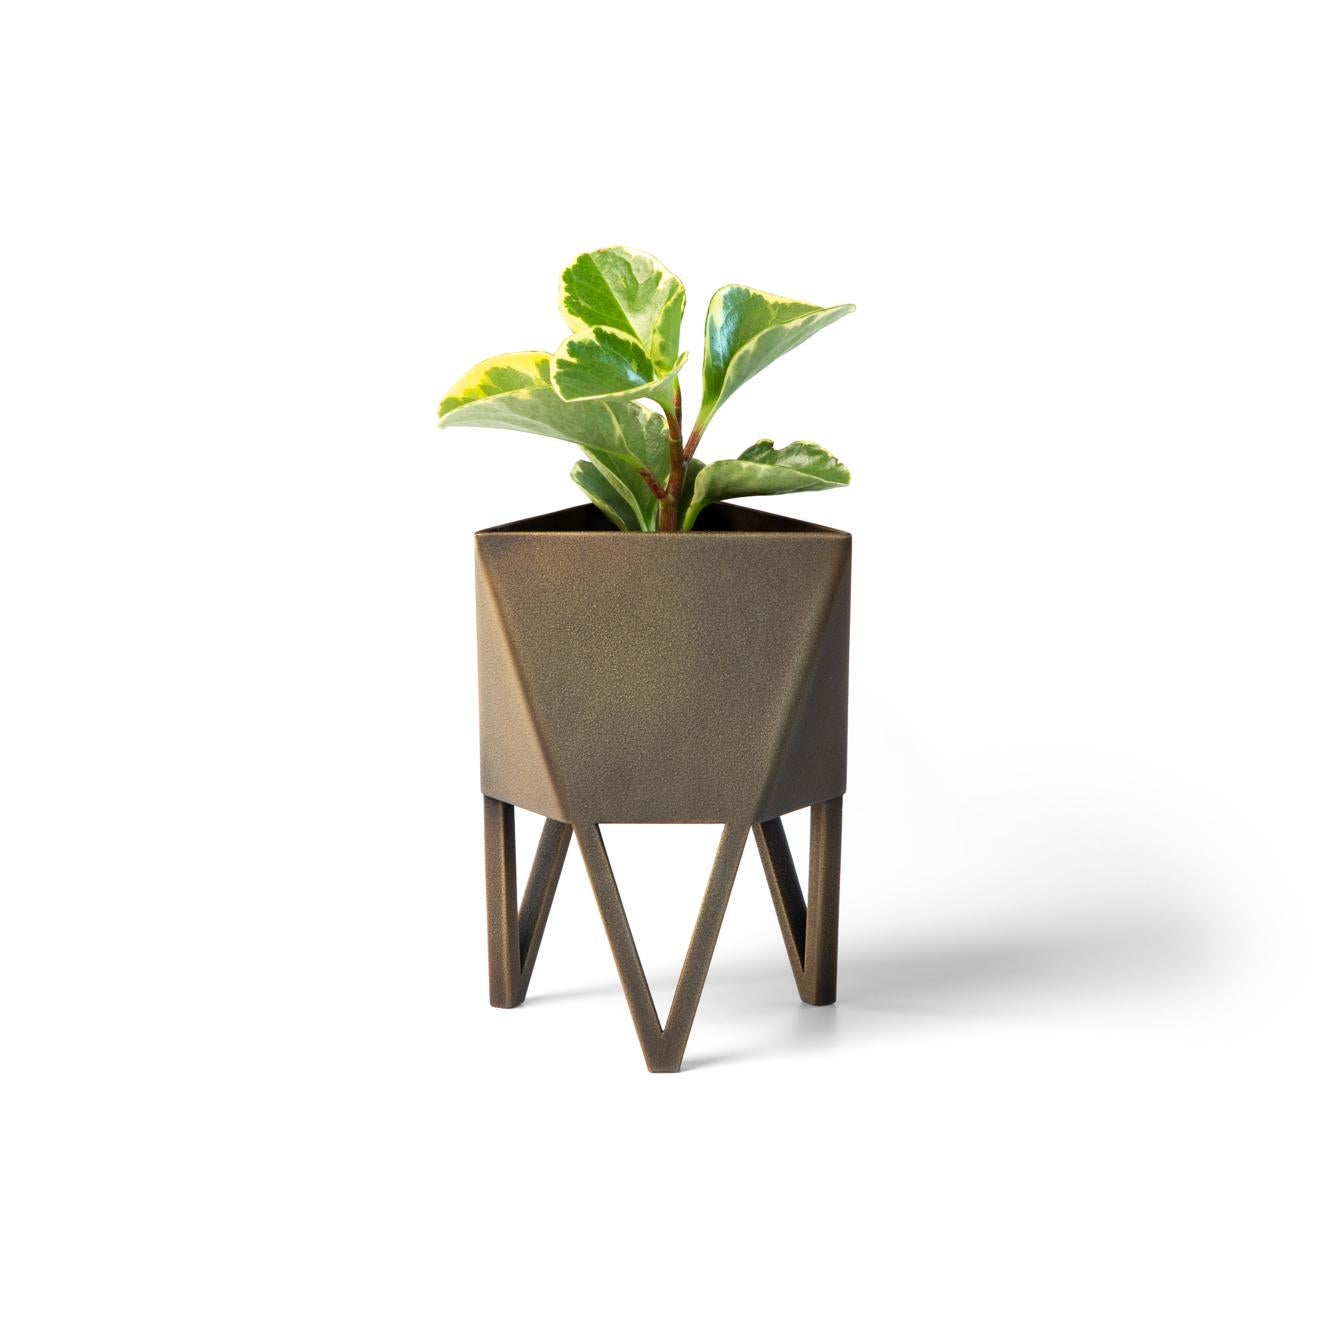 Deca Planter in Black By Force/Collide, Size Large, 2023 For Sale 9